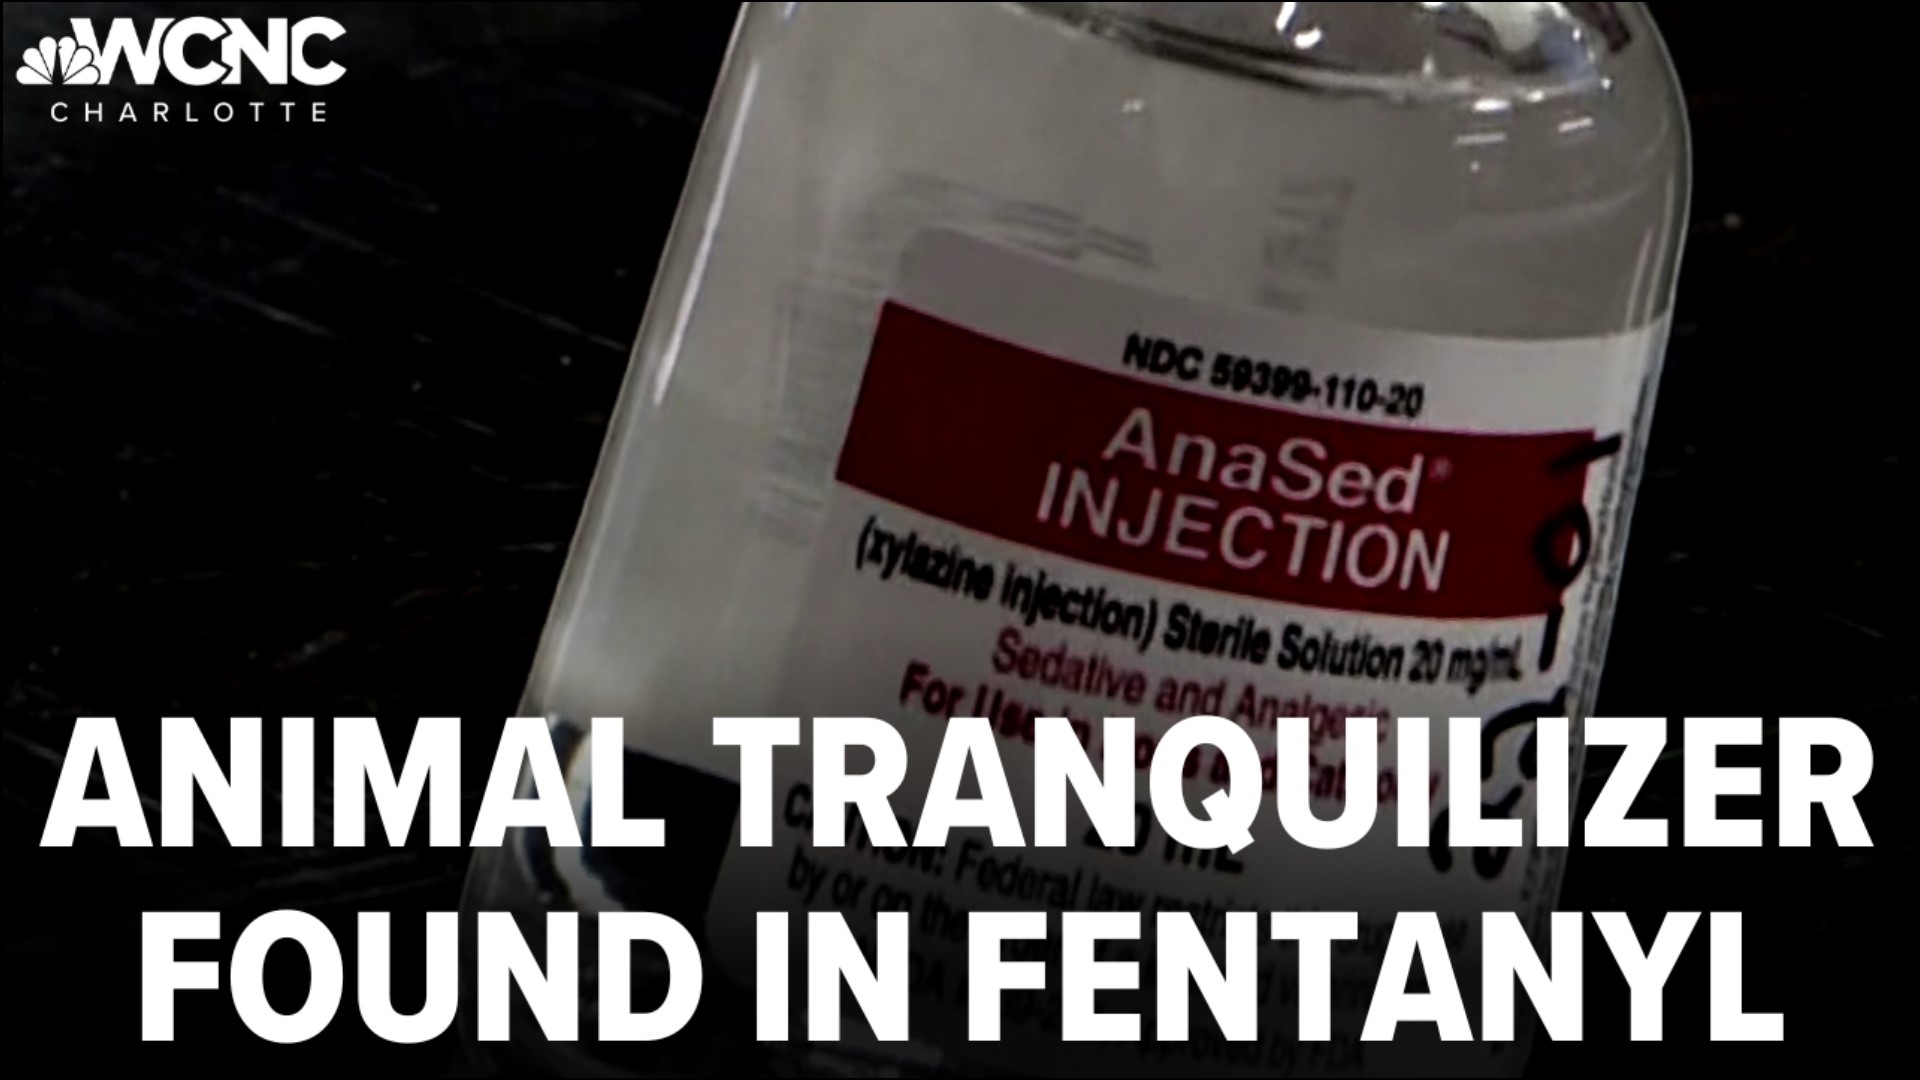 Drug dealers are selling fentanyl in the form of powders and pills, but now they're adding a dangerous animal tranquilizer to it.